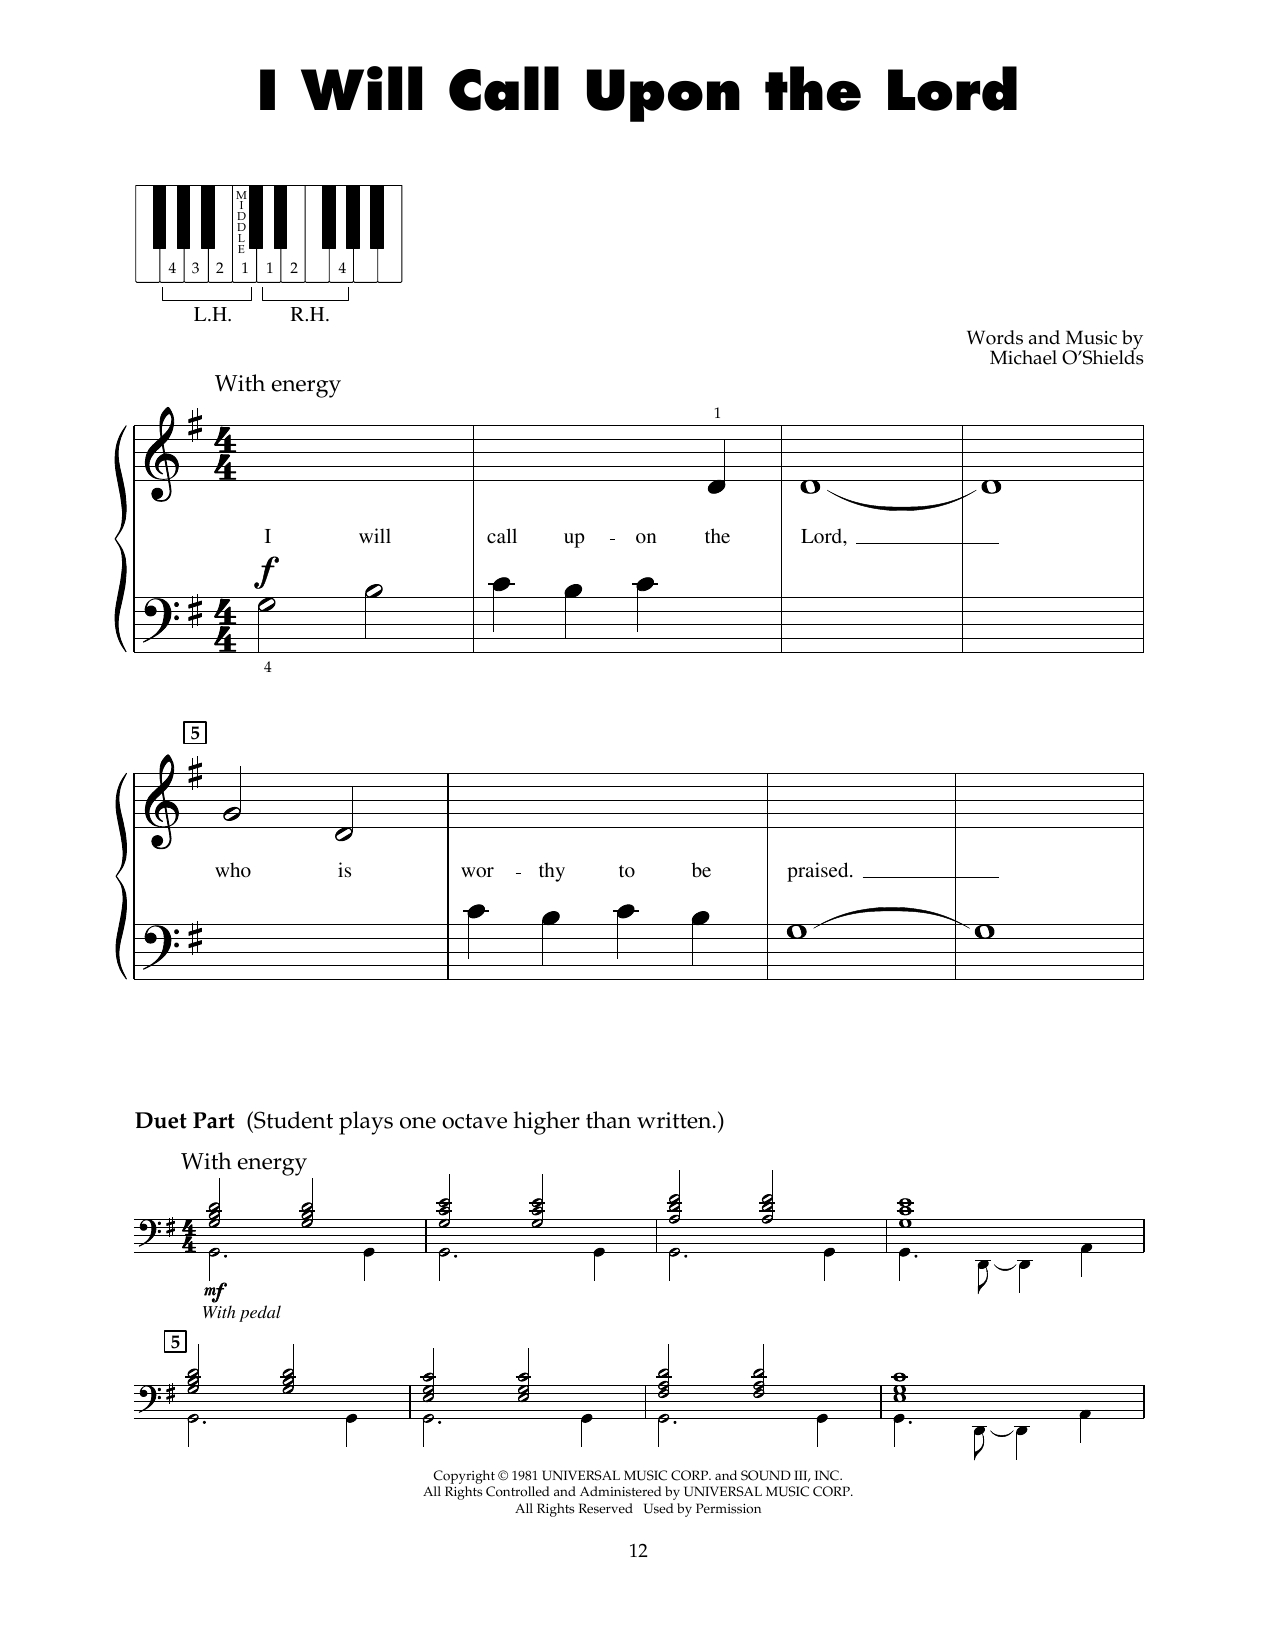 Michael O'Shields I Will Call Upon The Lord sheet music notes printable PDF score